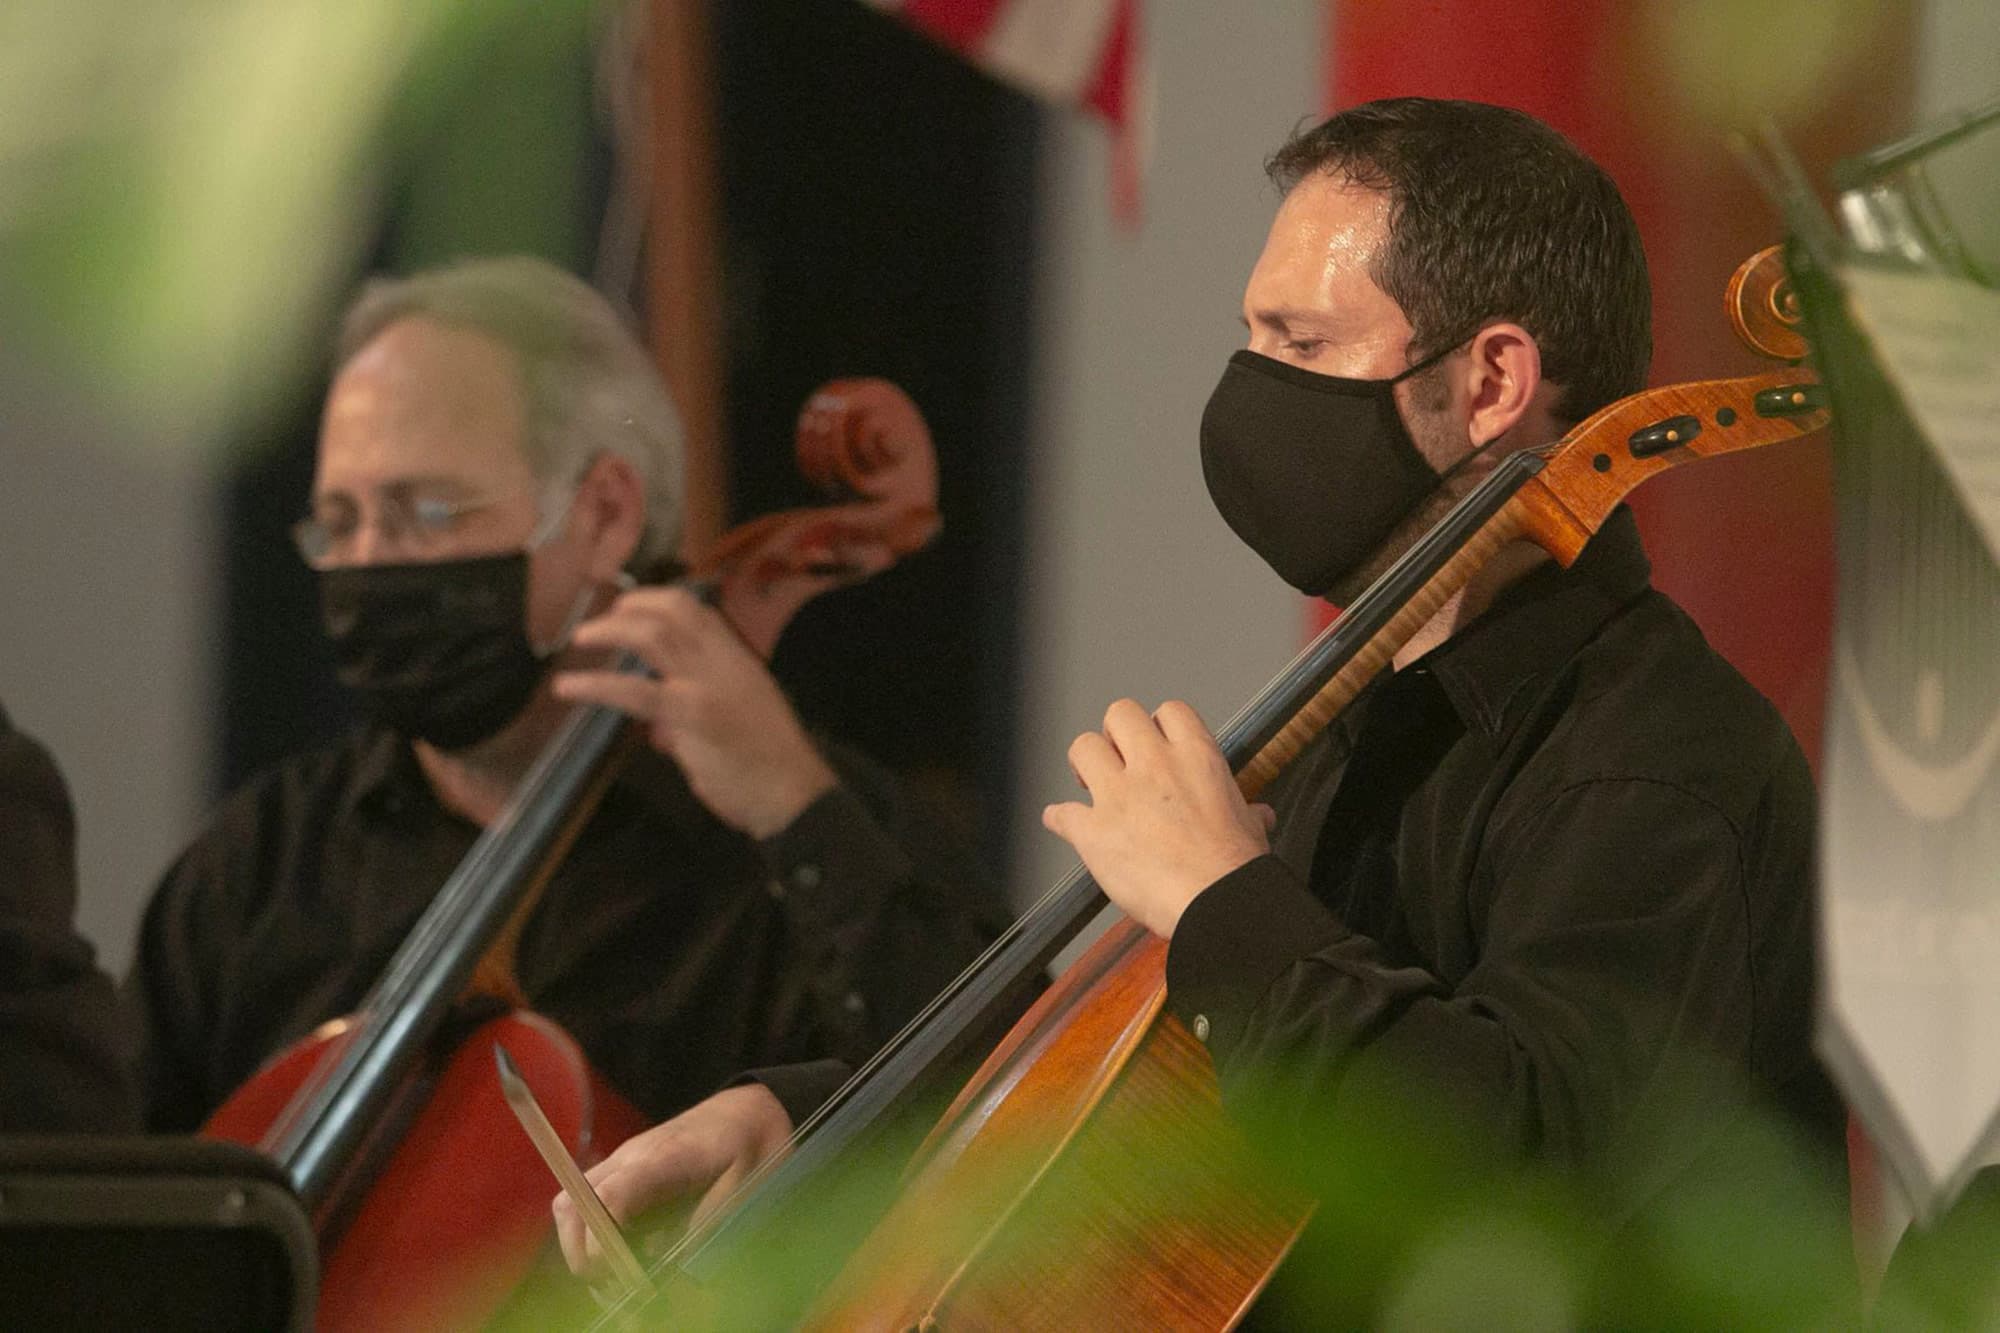 Lakeland Symphony Orchestra chamber ensemble wearing masks during performance in photo for Kingdom of Sweets